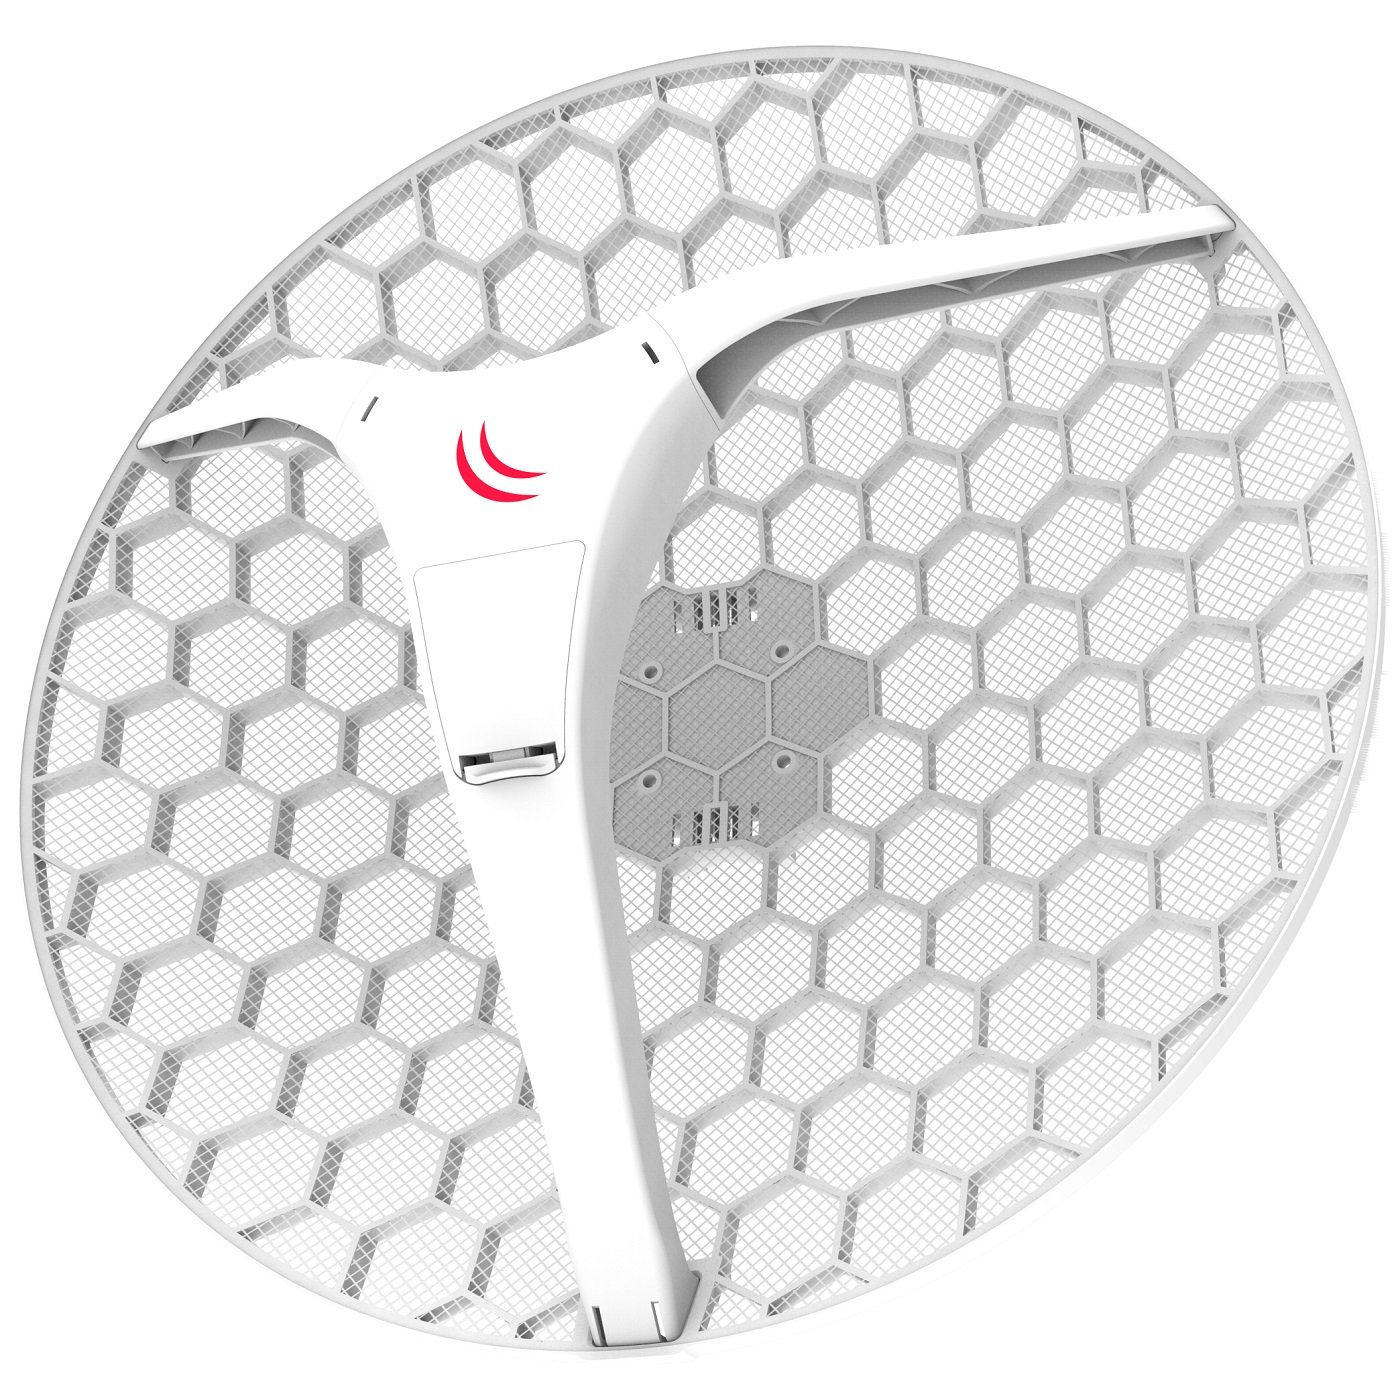 MikroTik LHG XL HP5 Dual Chain Extra Large High Power 27dBi 5GHz CPE Point-to-Point Integrated Antenna (RBLHG-5HPnD-XL-US)